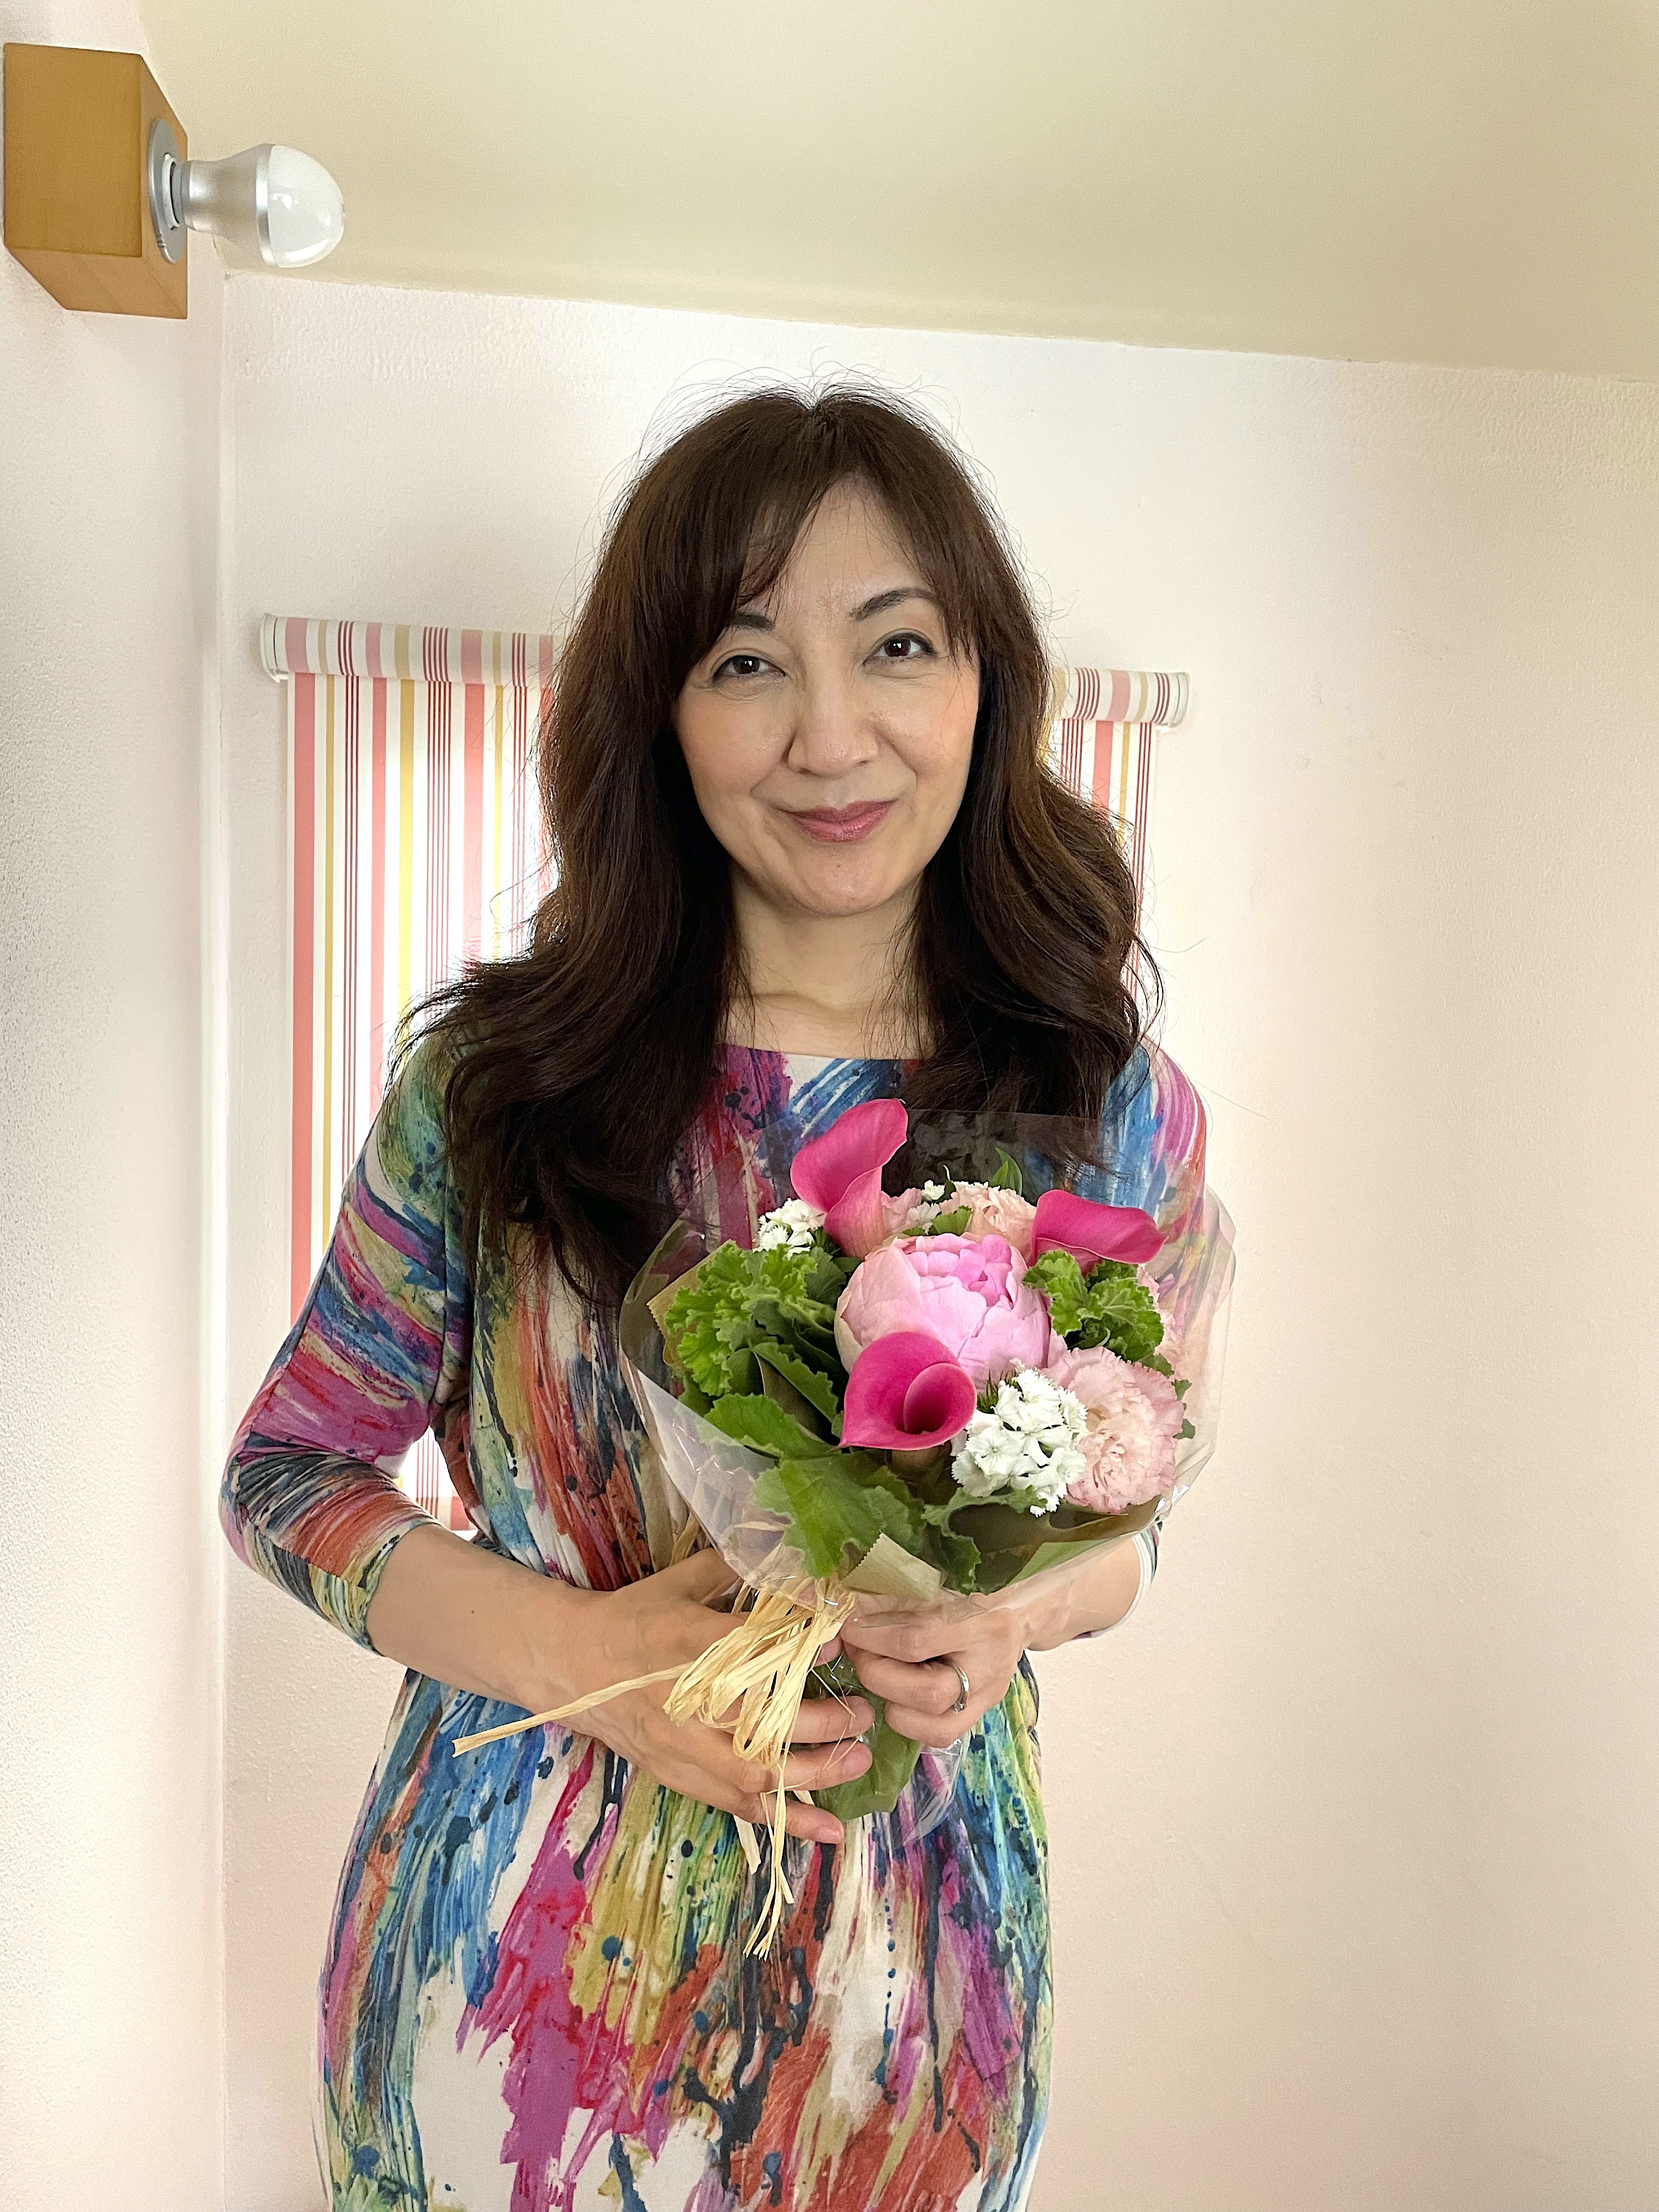 Clubhouse 樹原涼子とゆるりと過ごす部屋 🎹＃85 樹原涼子の新年の夢、樹原涼子へのリクエスト